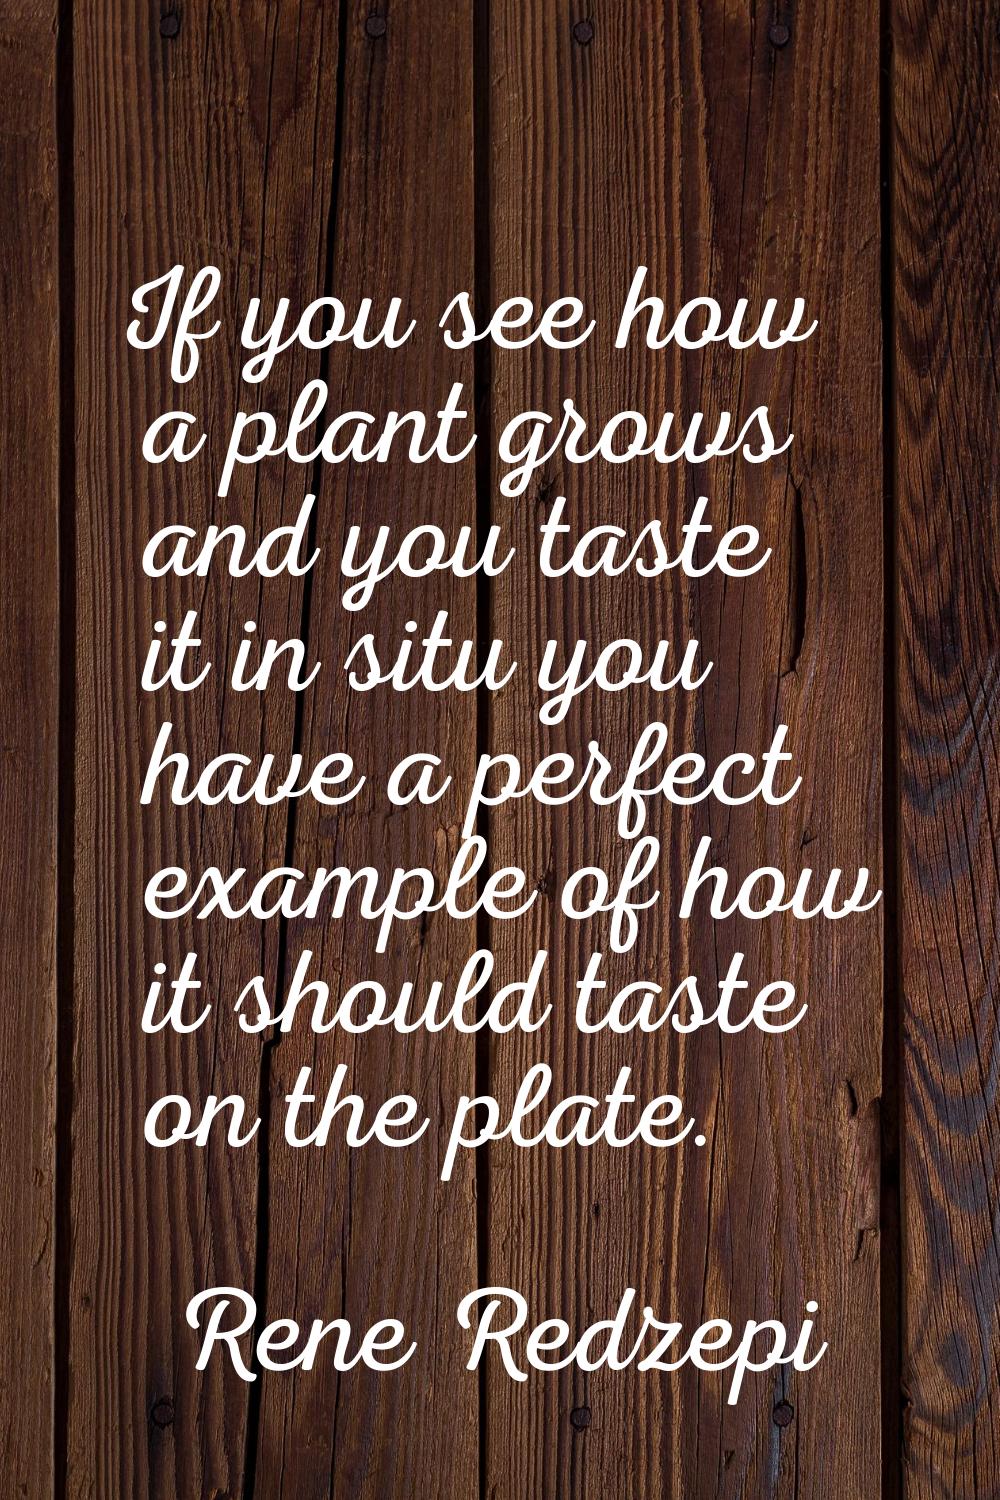 If you see how a plant grows and you taste it in situ you have a perfect example of how it should t